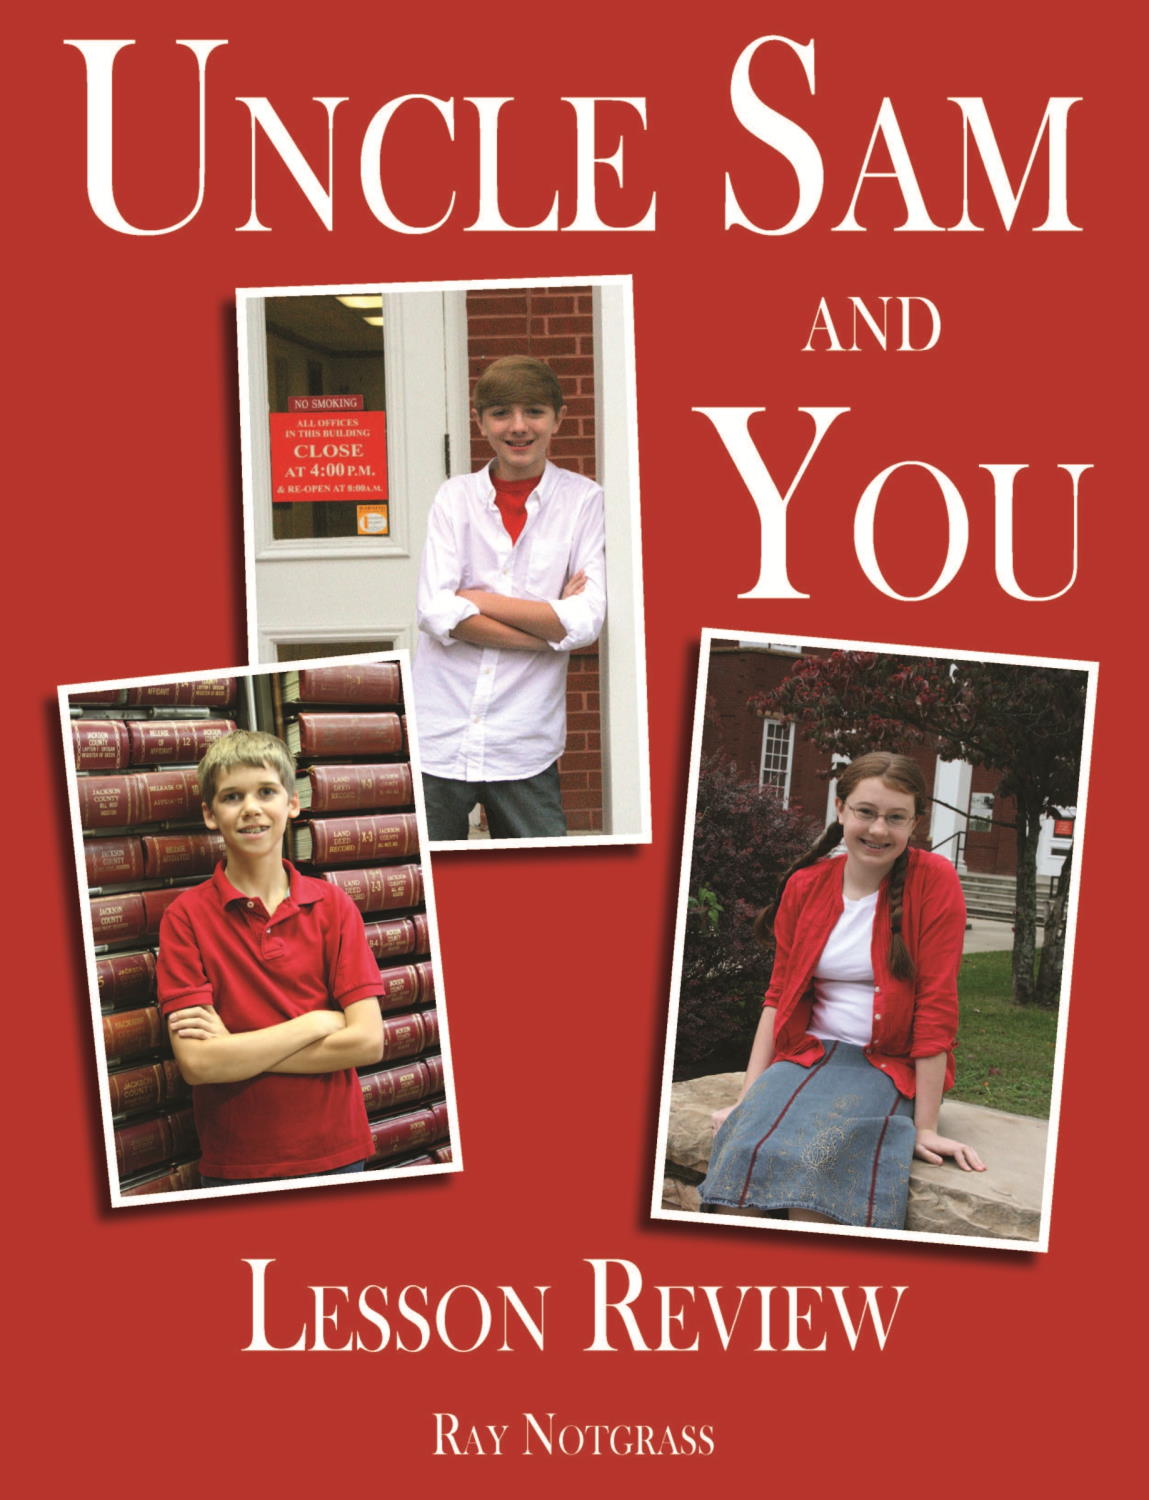 Uncle Sam and You Lesson Review